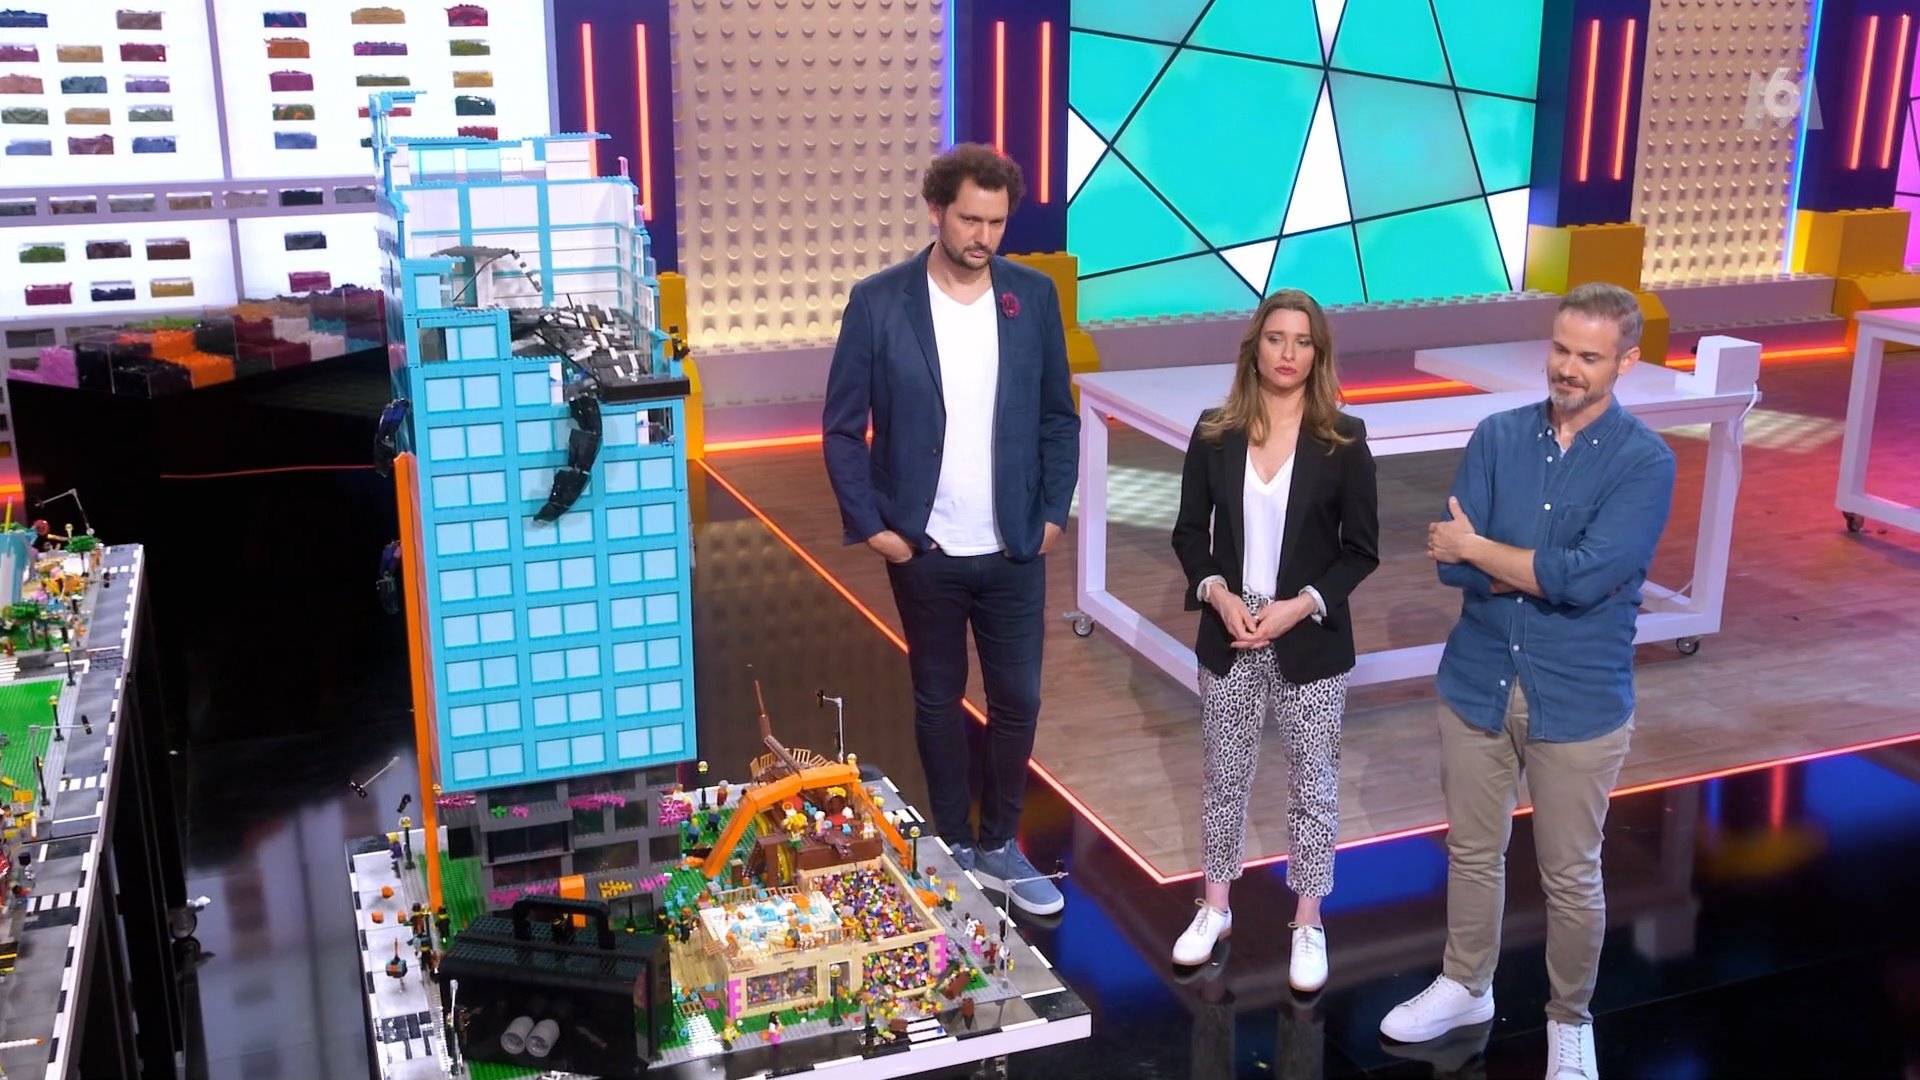 LEGO Masters France Season 1  -  Episode 3  Mega Cities & Cut In Half Challenge Hosted by Magician Eric Antoine and judged by Artist Paulina Aubey & LEGO Certified Professional Georg Schmitt. The series leads the way for new challenges you're likely to see around the world. Our teams are Maximilien & Thibault, Christelle & Johan, Marguerite & Renaud, Yann & Jean-Philippe, Loïc & Guillaume, Alban & Xavier, Sébastien & David and Ariana & Aurélien.